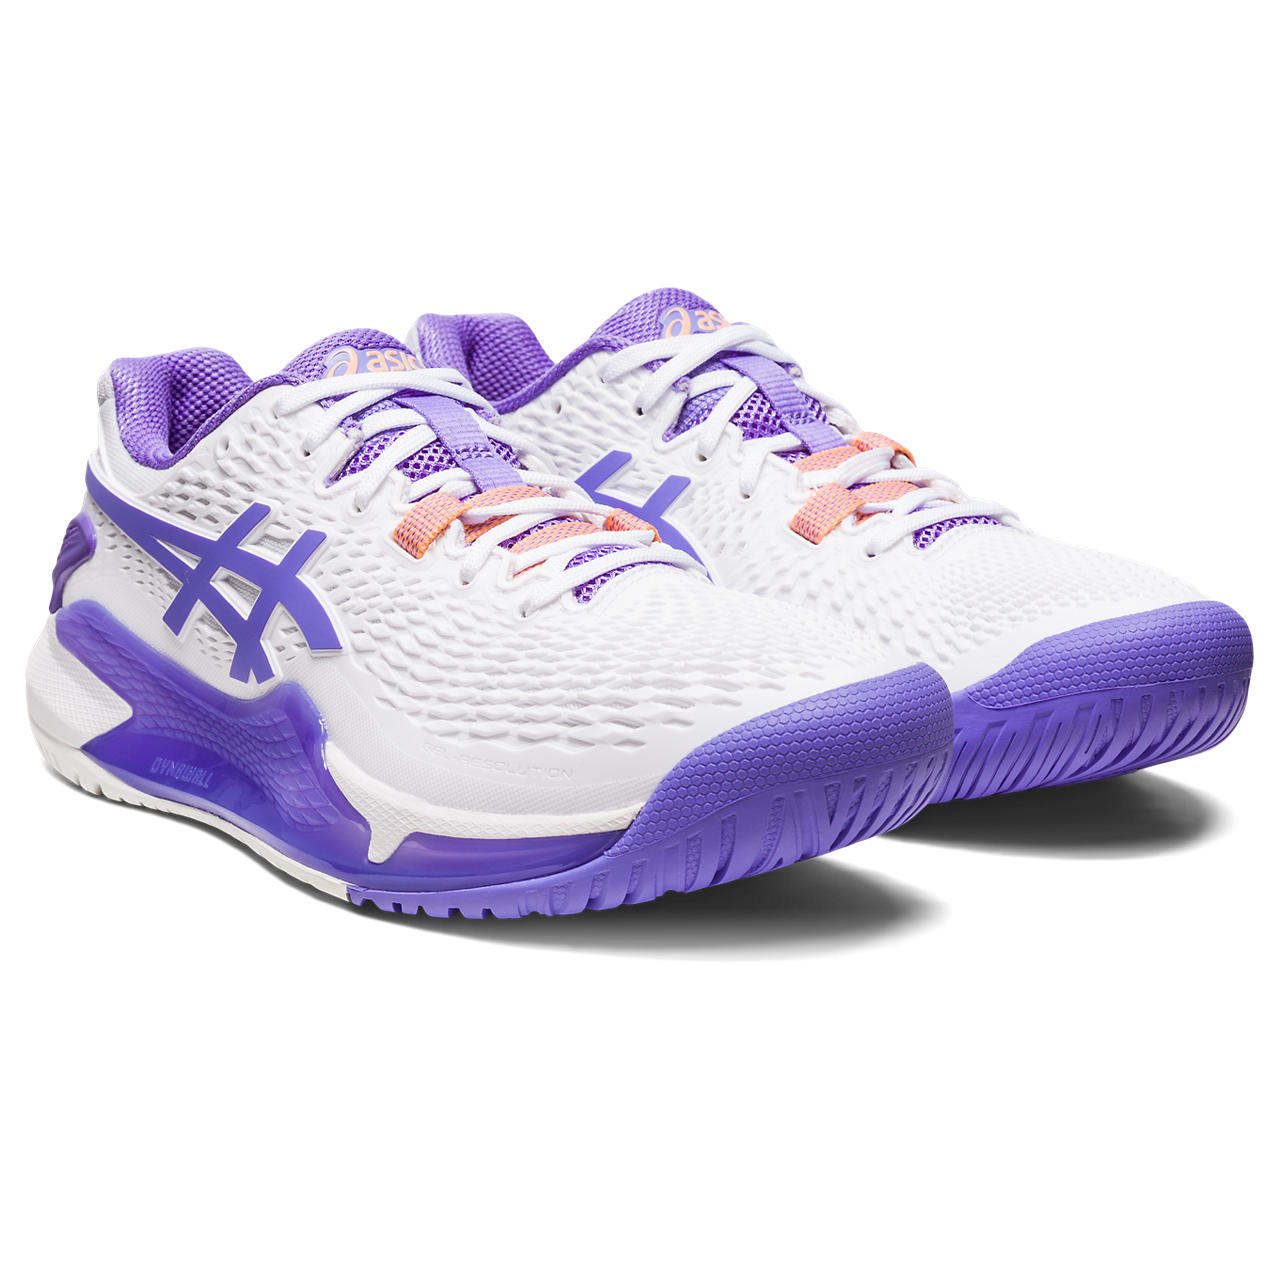 Front angle view of the Women's ASIC Resolution 9 tennis shoe in the color White/Amethyst